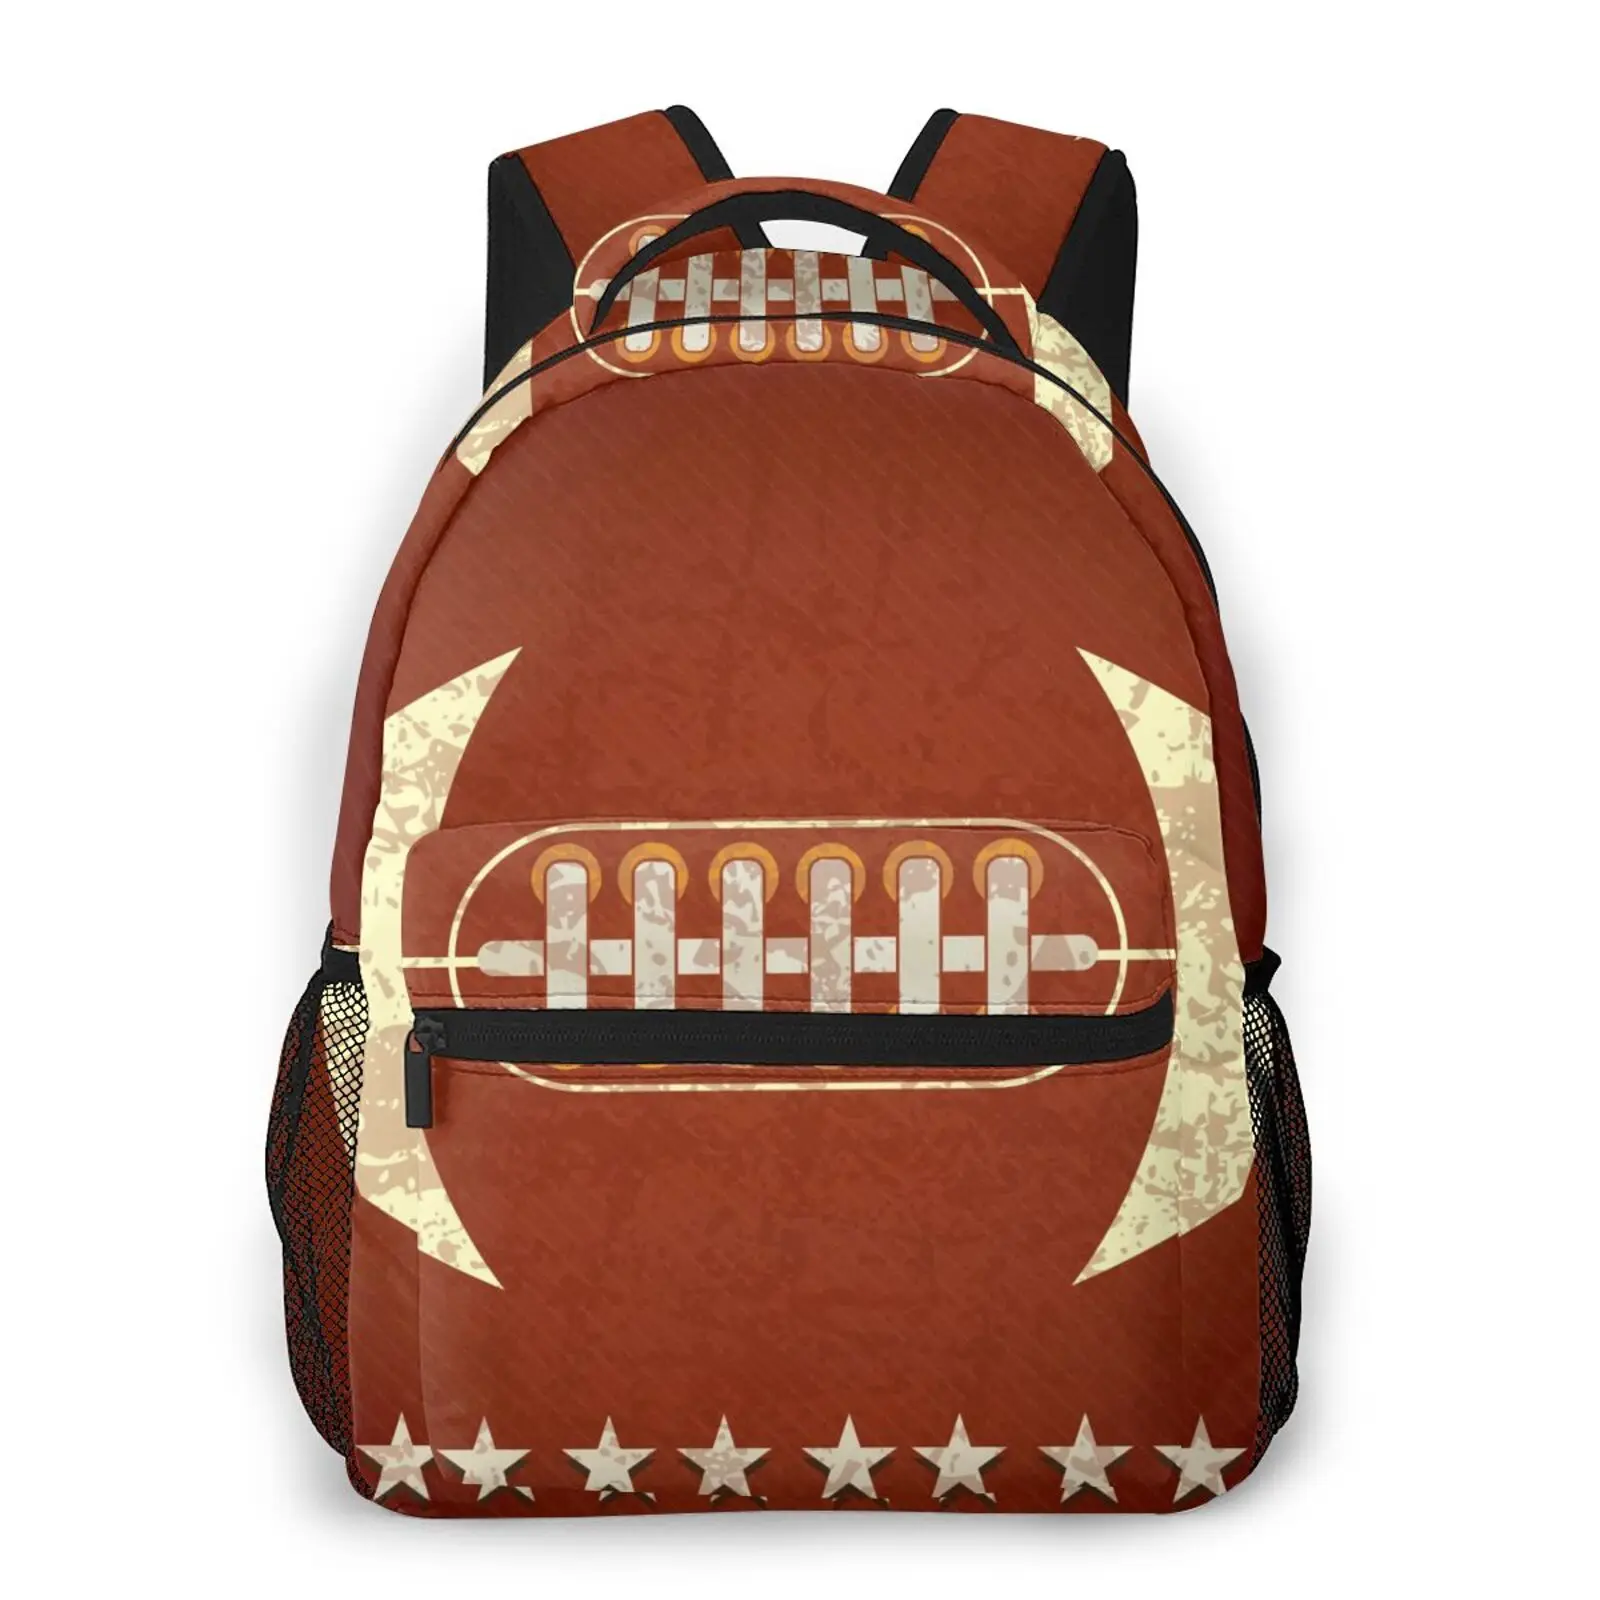 

Fashion Girl College School Bag Casual New Unique Women Backpack American Football Book Packbag for Teenage Travel Shoulder Bag